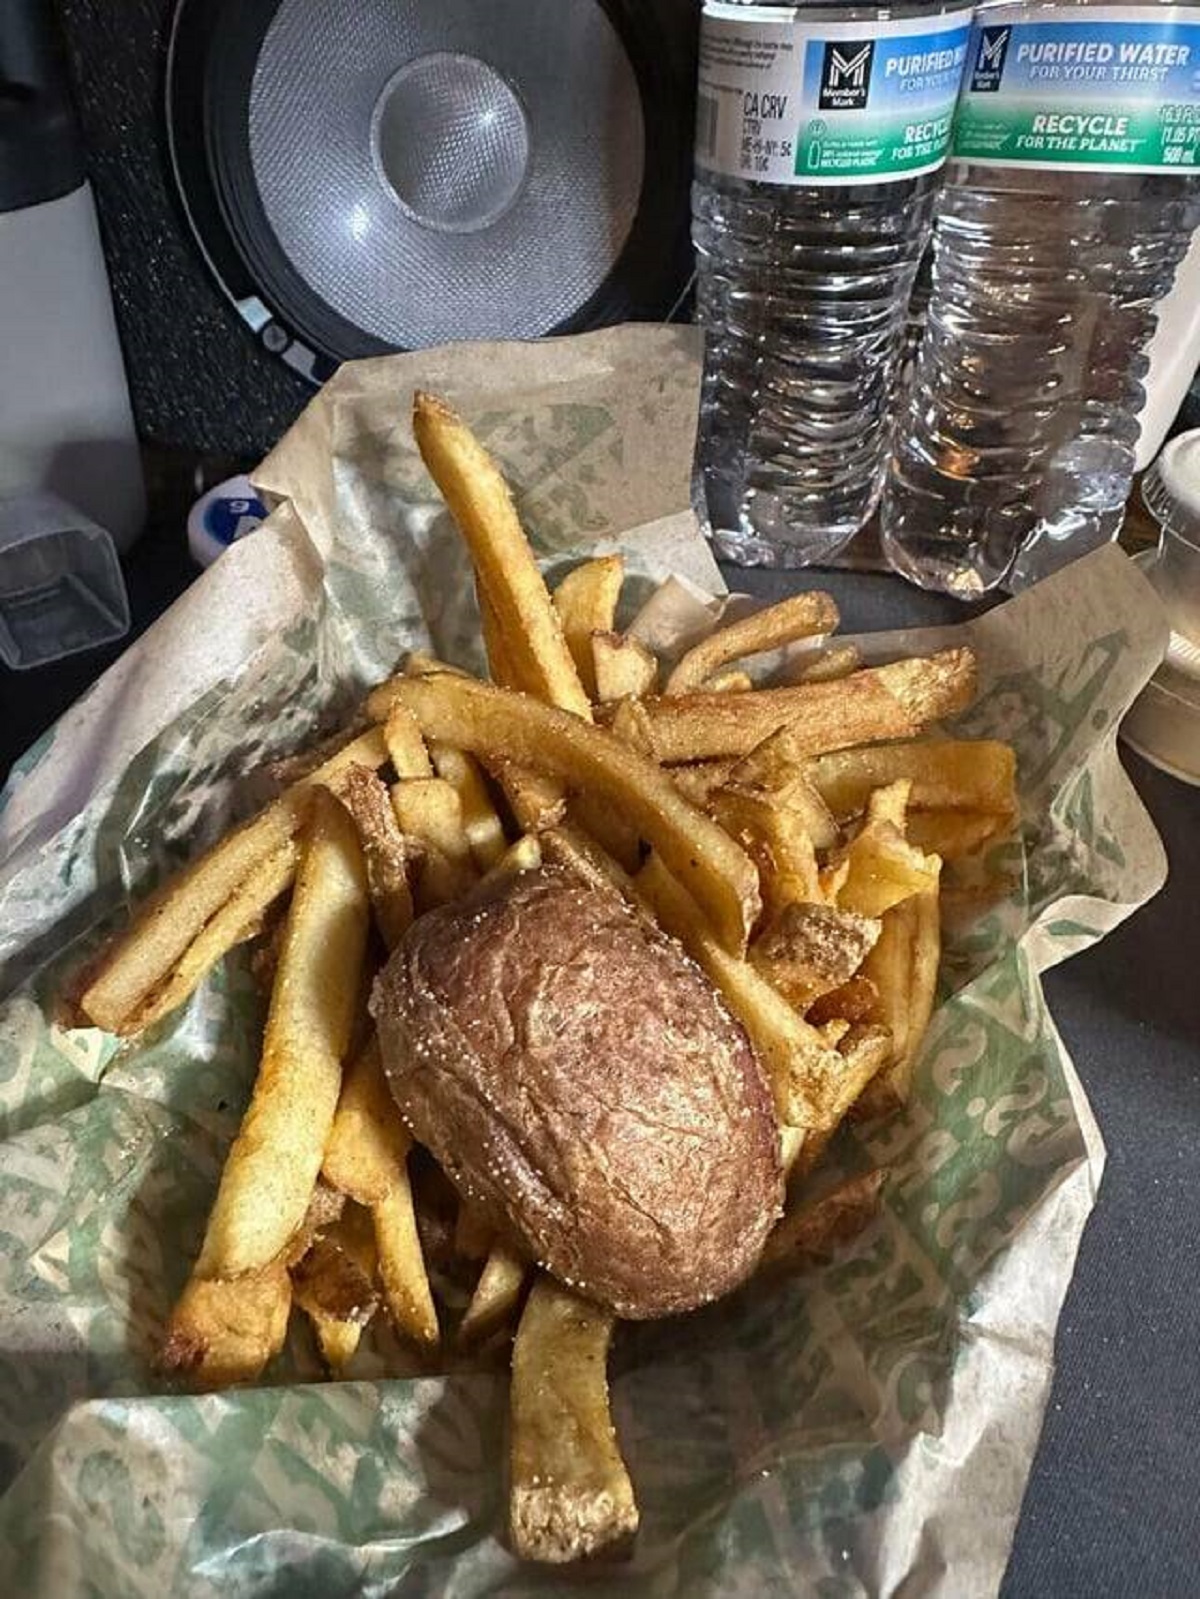 "There was a whole potato in my WingStop fries"